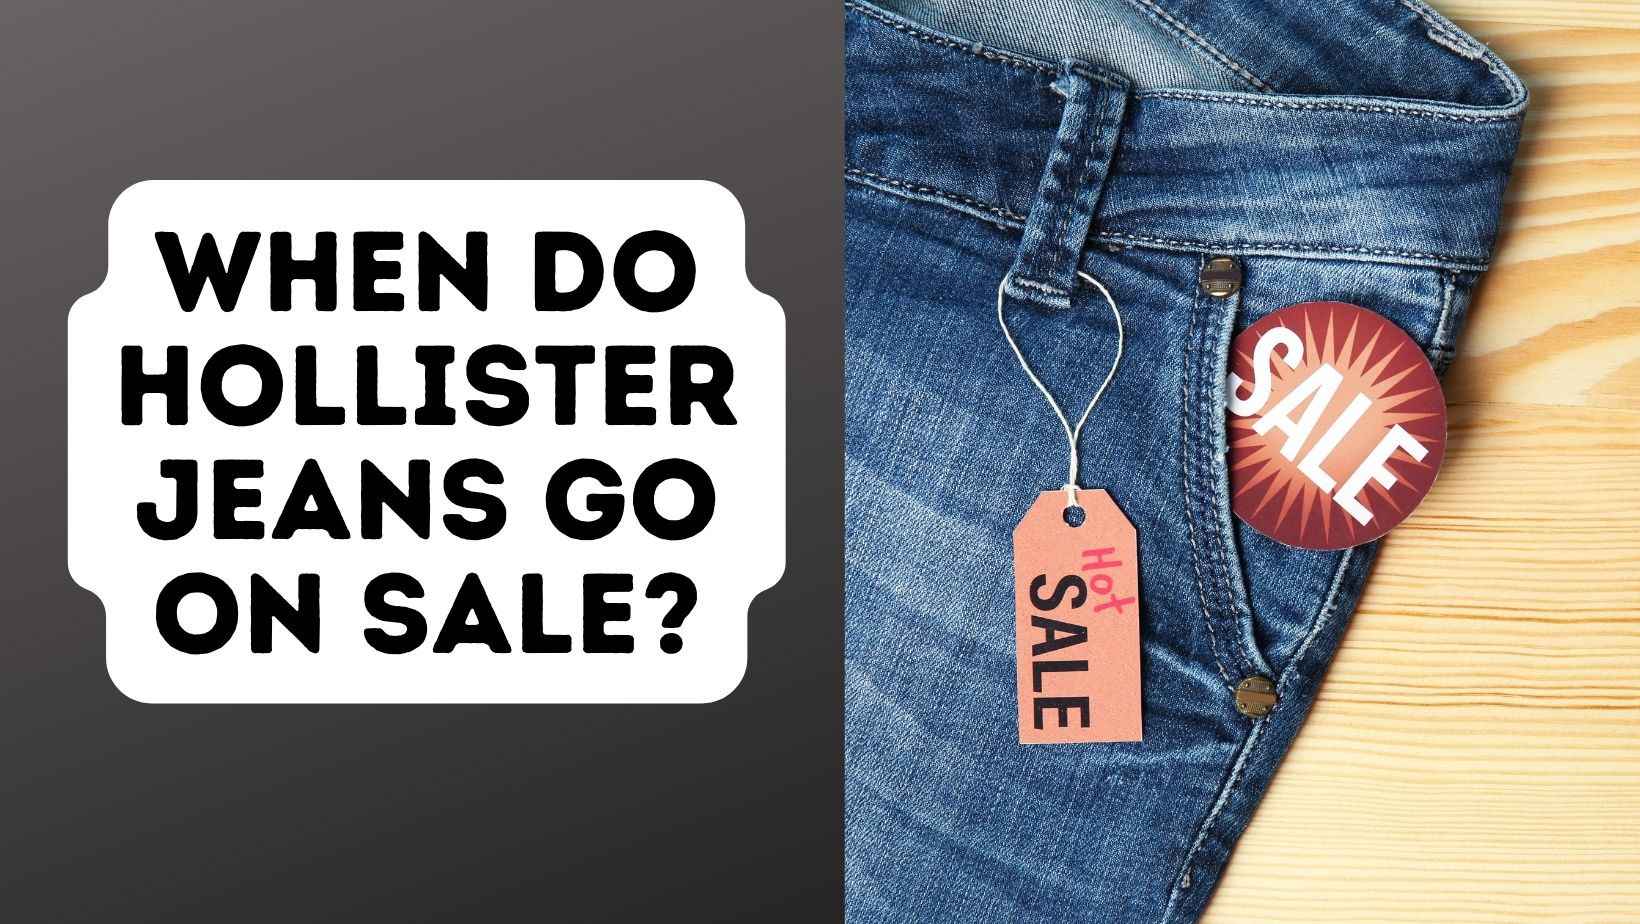 When Do Hollister Jeans Go On Sale?